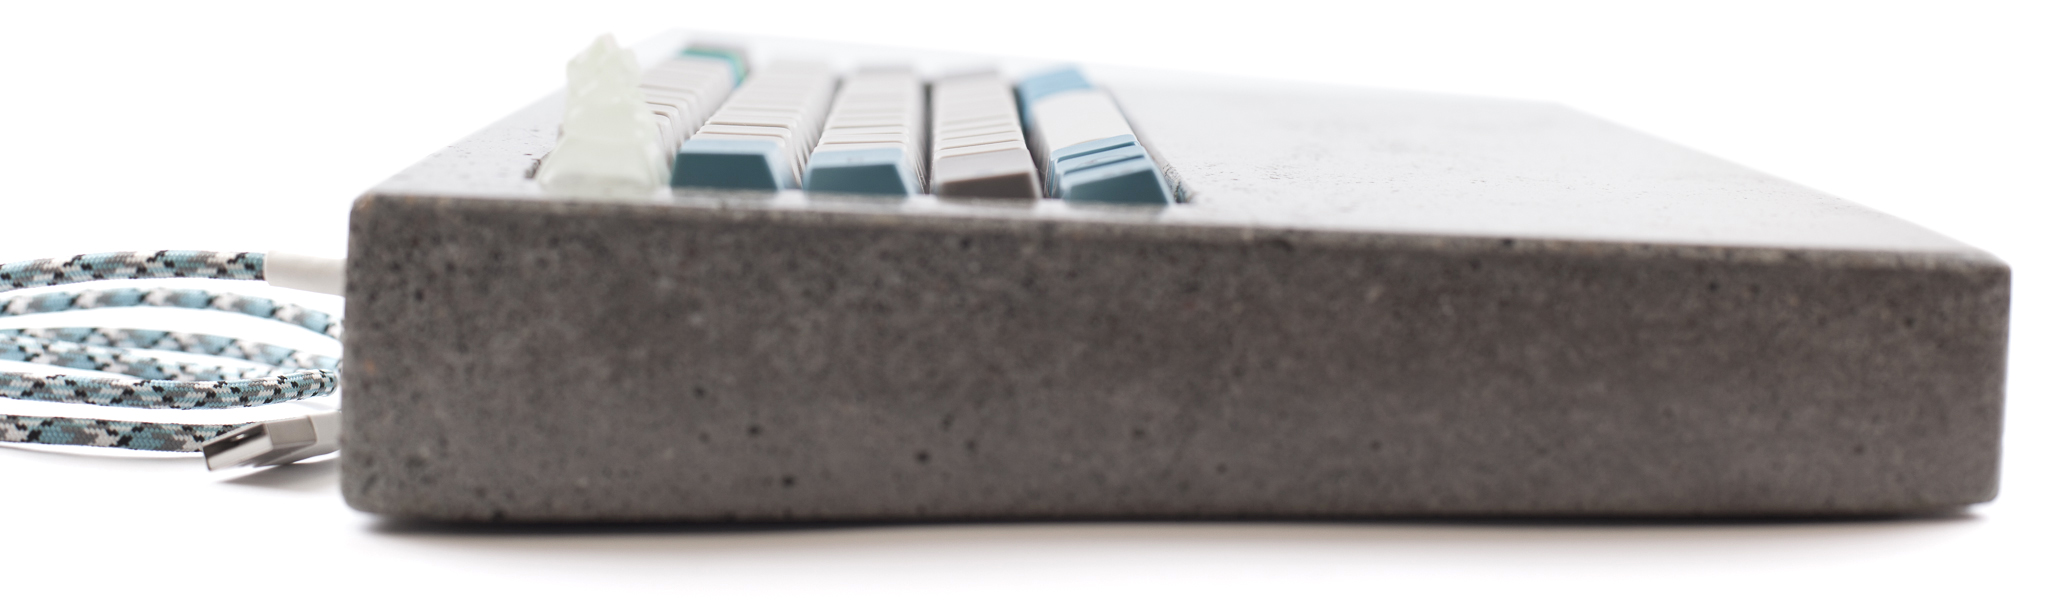 Picky Typist Builds A Custom Keyboard Out Of Concrete